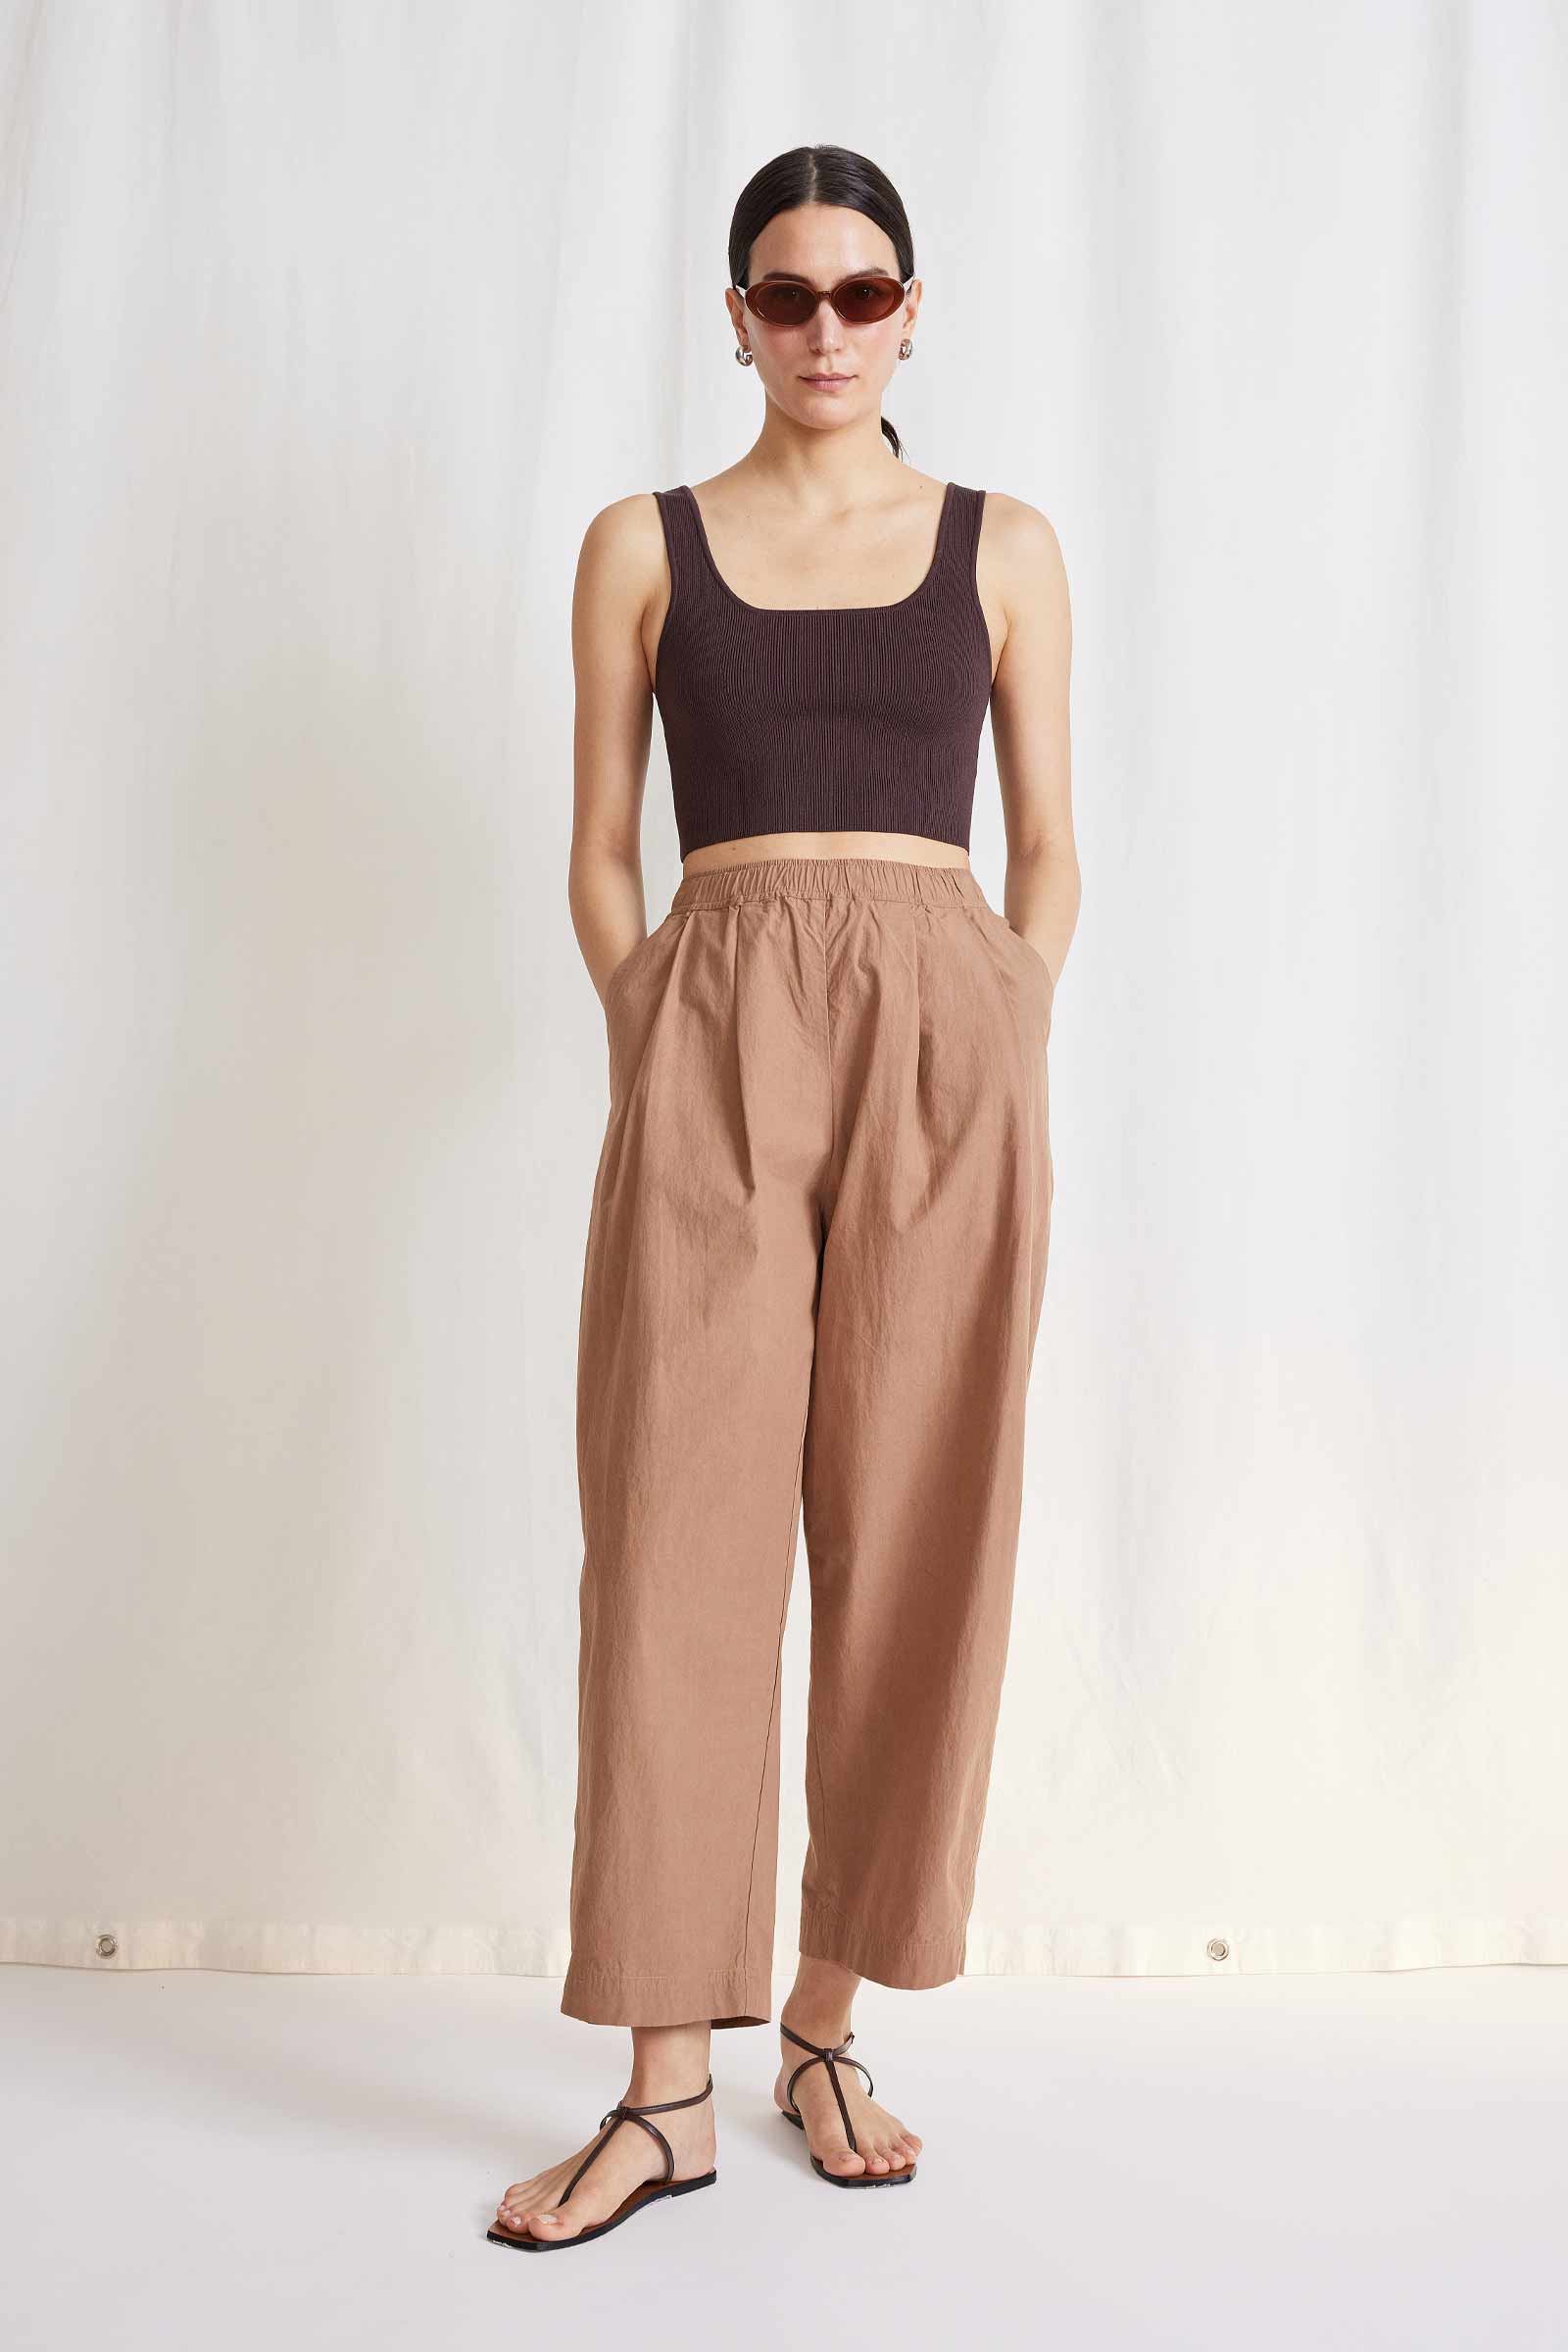 A lookbook image of a model wearing the Apiece Apart Spa Pleat Pant.